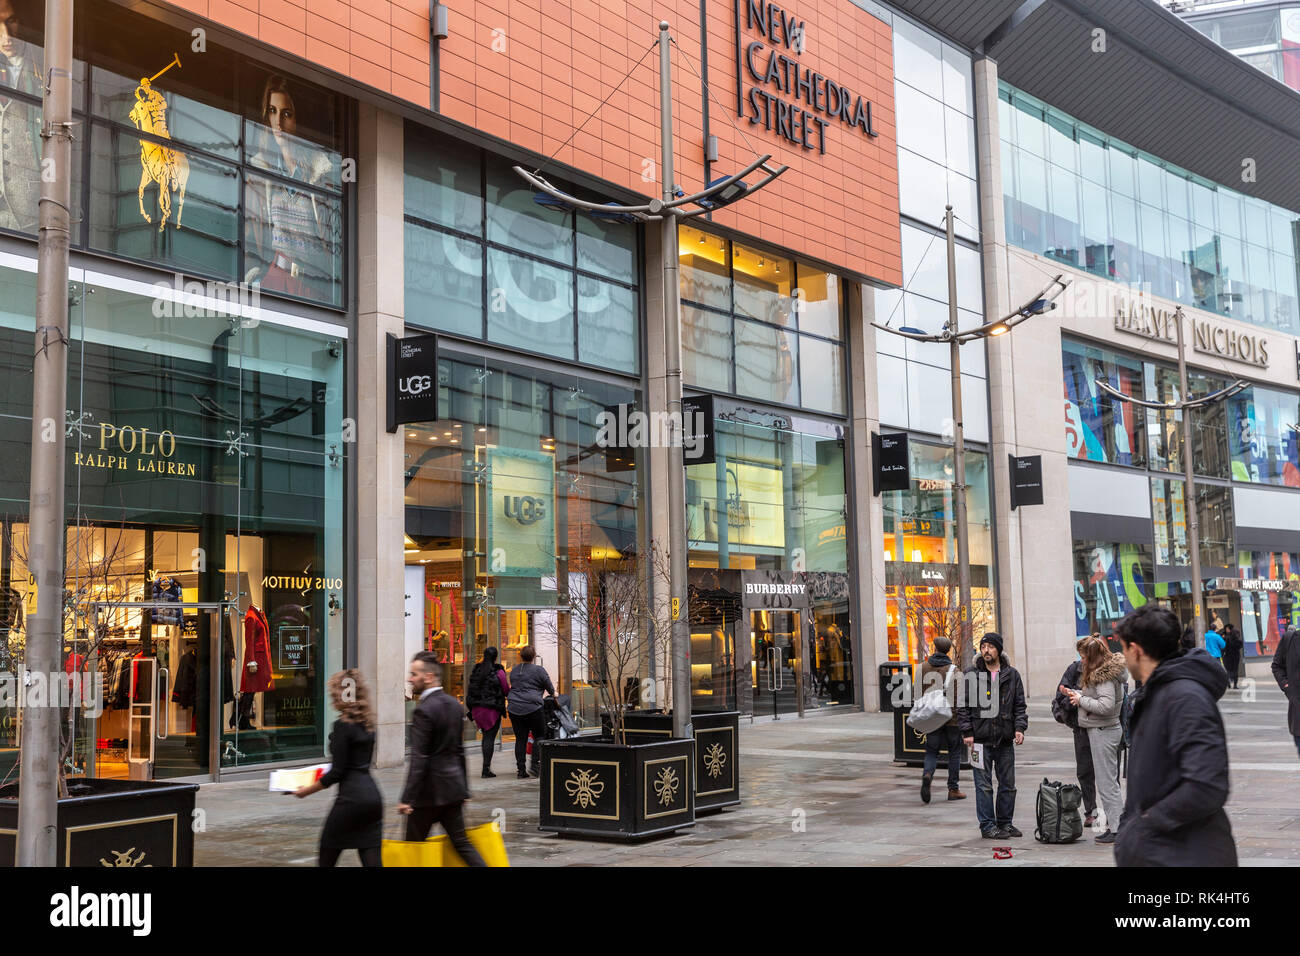 New Cathedral street in Manchester city centre with luxury goods retailers including Burberry,Ralph Lauren Polo and Harvey Nichols,England Stock Photo